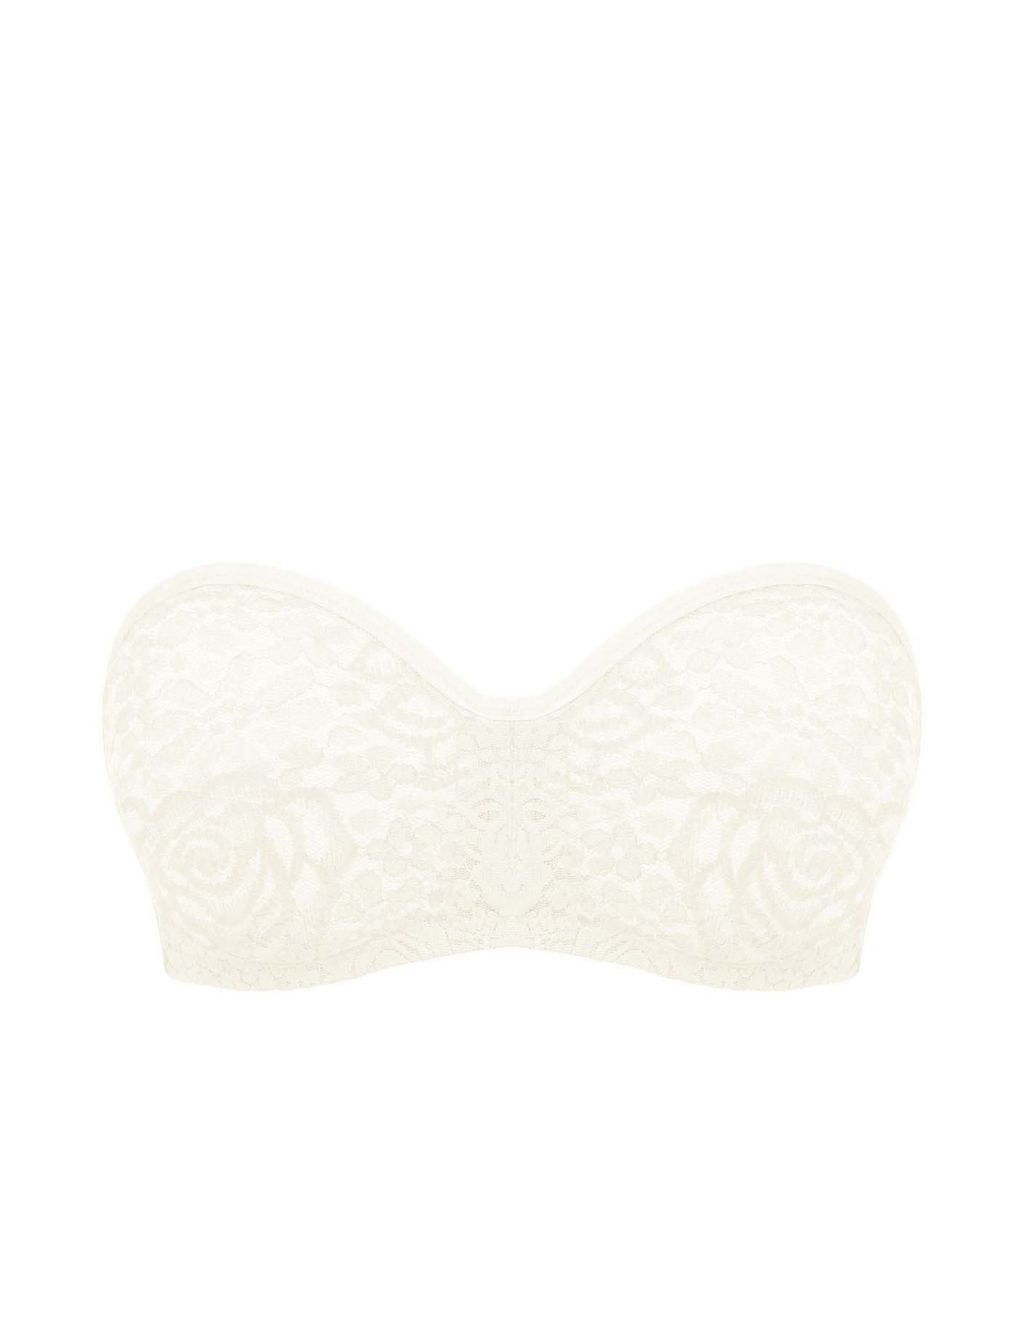 Halo Floral Lace Wired Strapless Bra 1 of 7